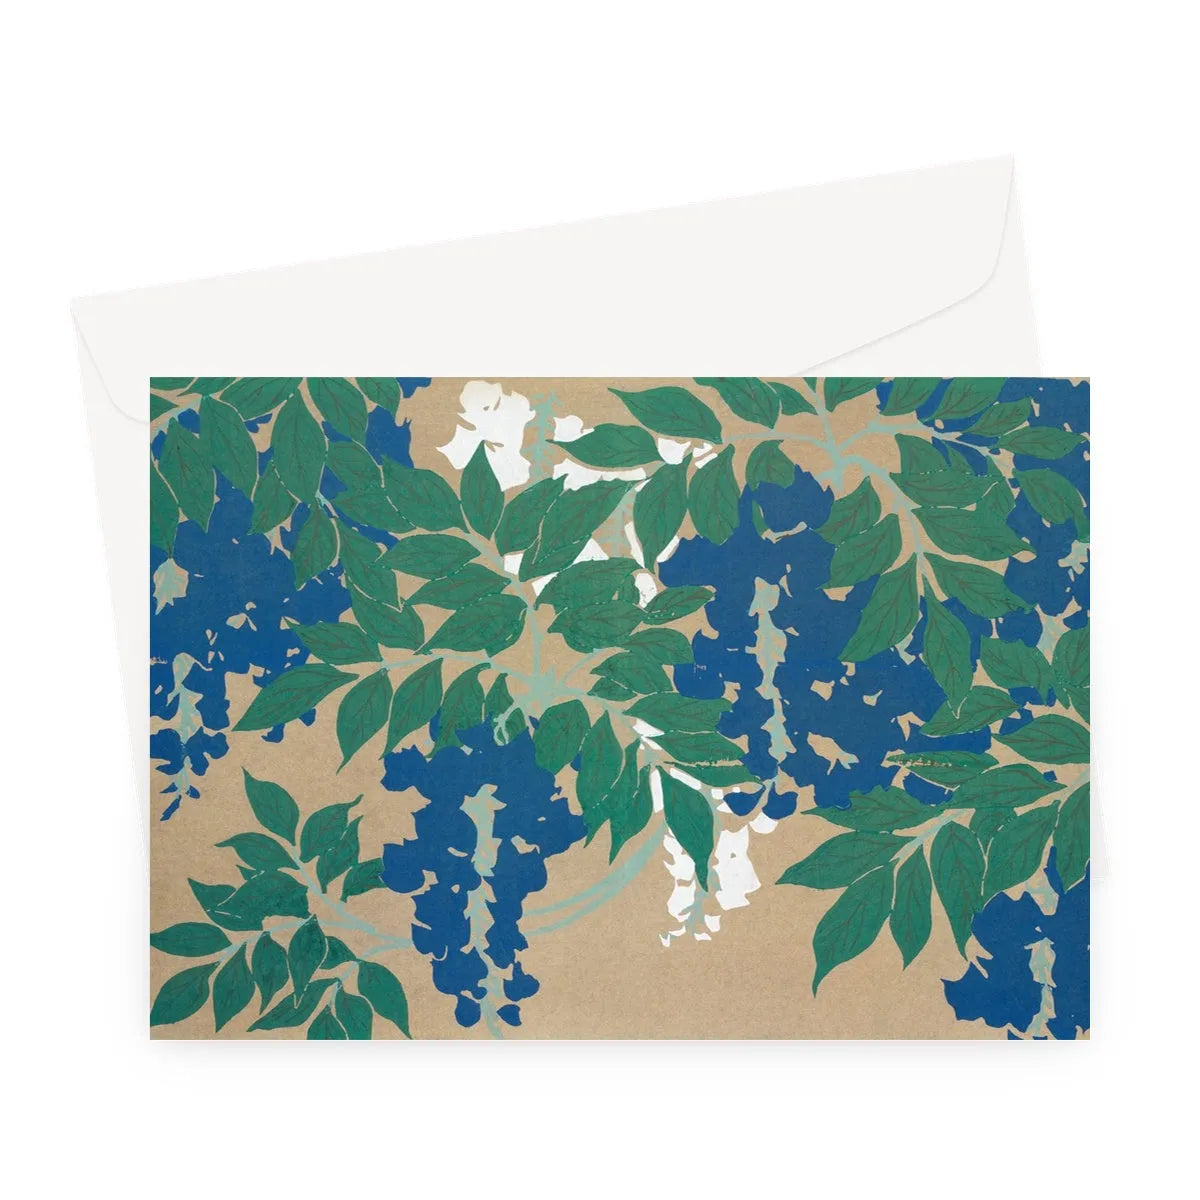 Wisteria From Momoyogusa By Kamisaka Sekka Greeting Card - A5 Landscape / 1 Card - Greeting & Note Cards - Aesthetic Art